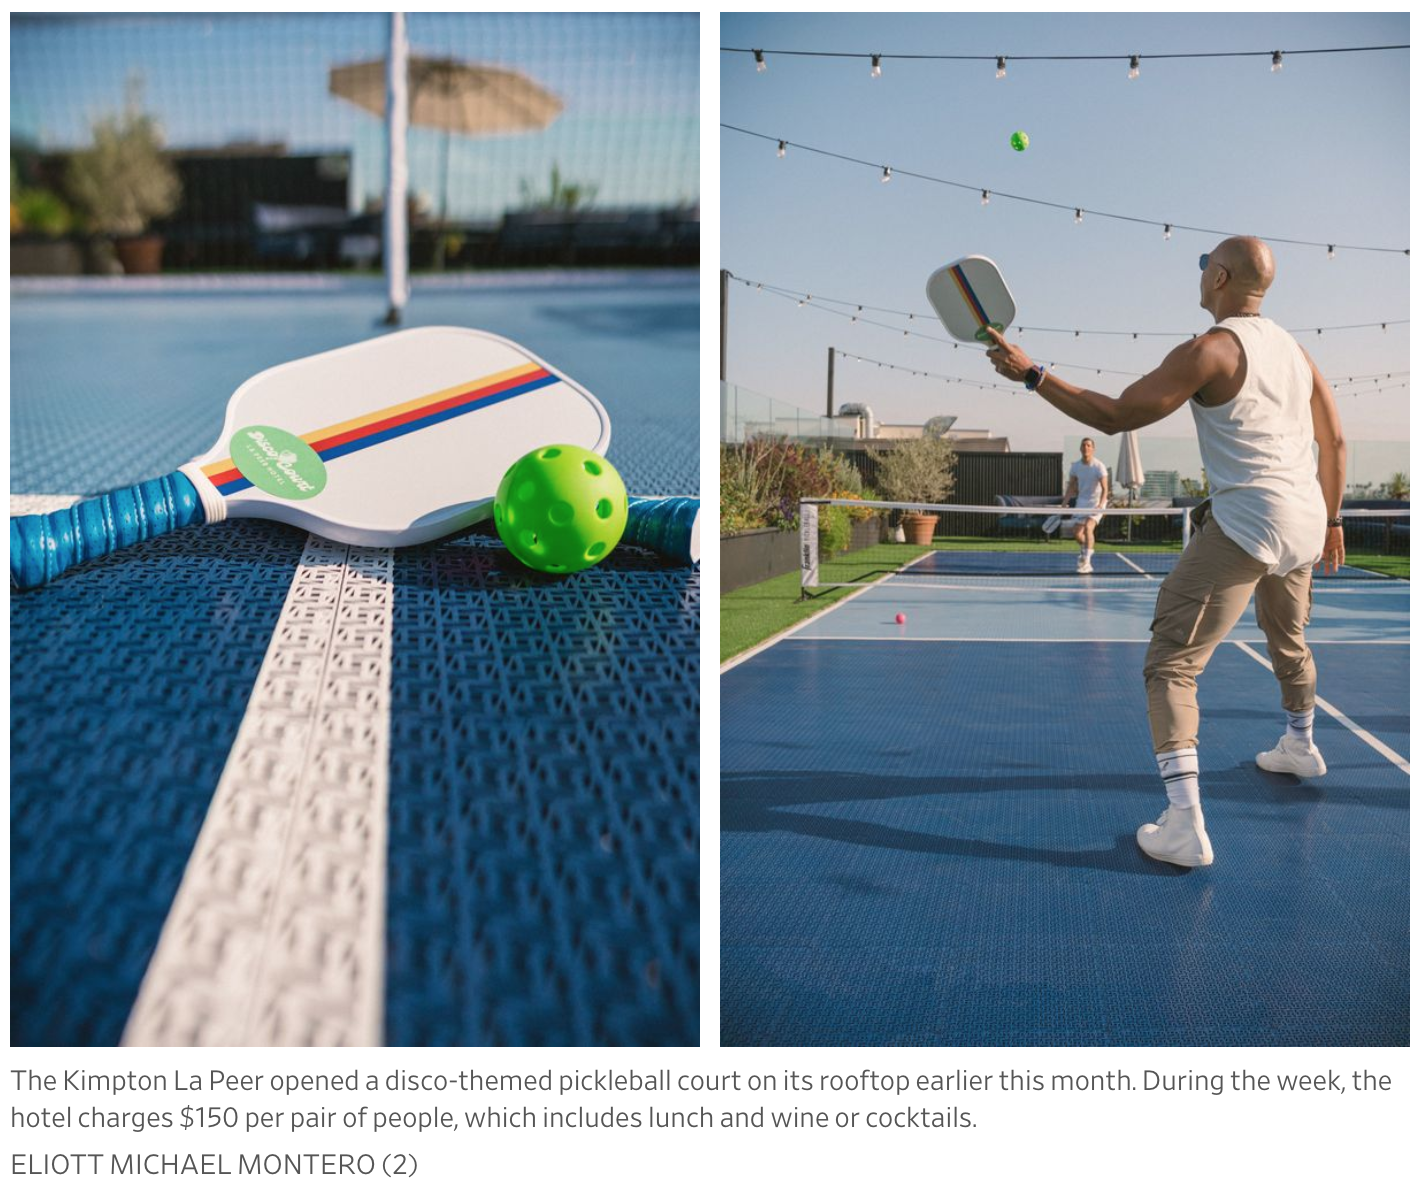 Move Over, Tennis And Golf. Networks And Brands Are Cashing In On Pickleball